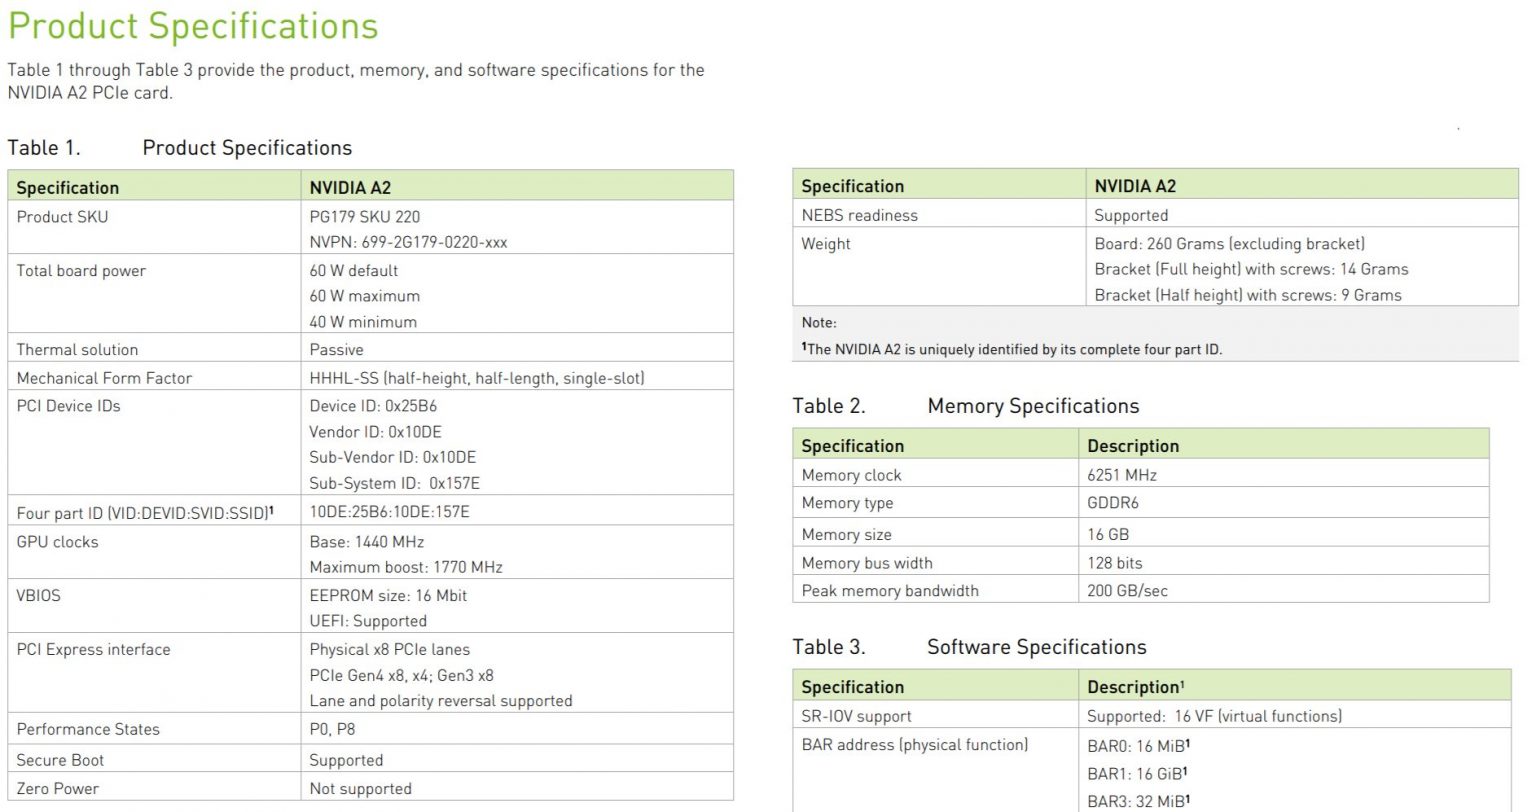 NVIDIA-A2-Specifications-1536x812.jpg